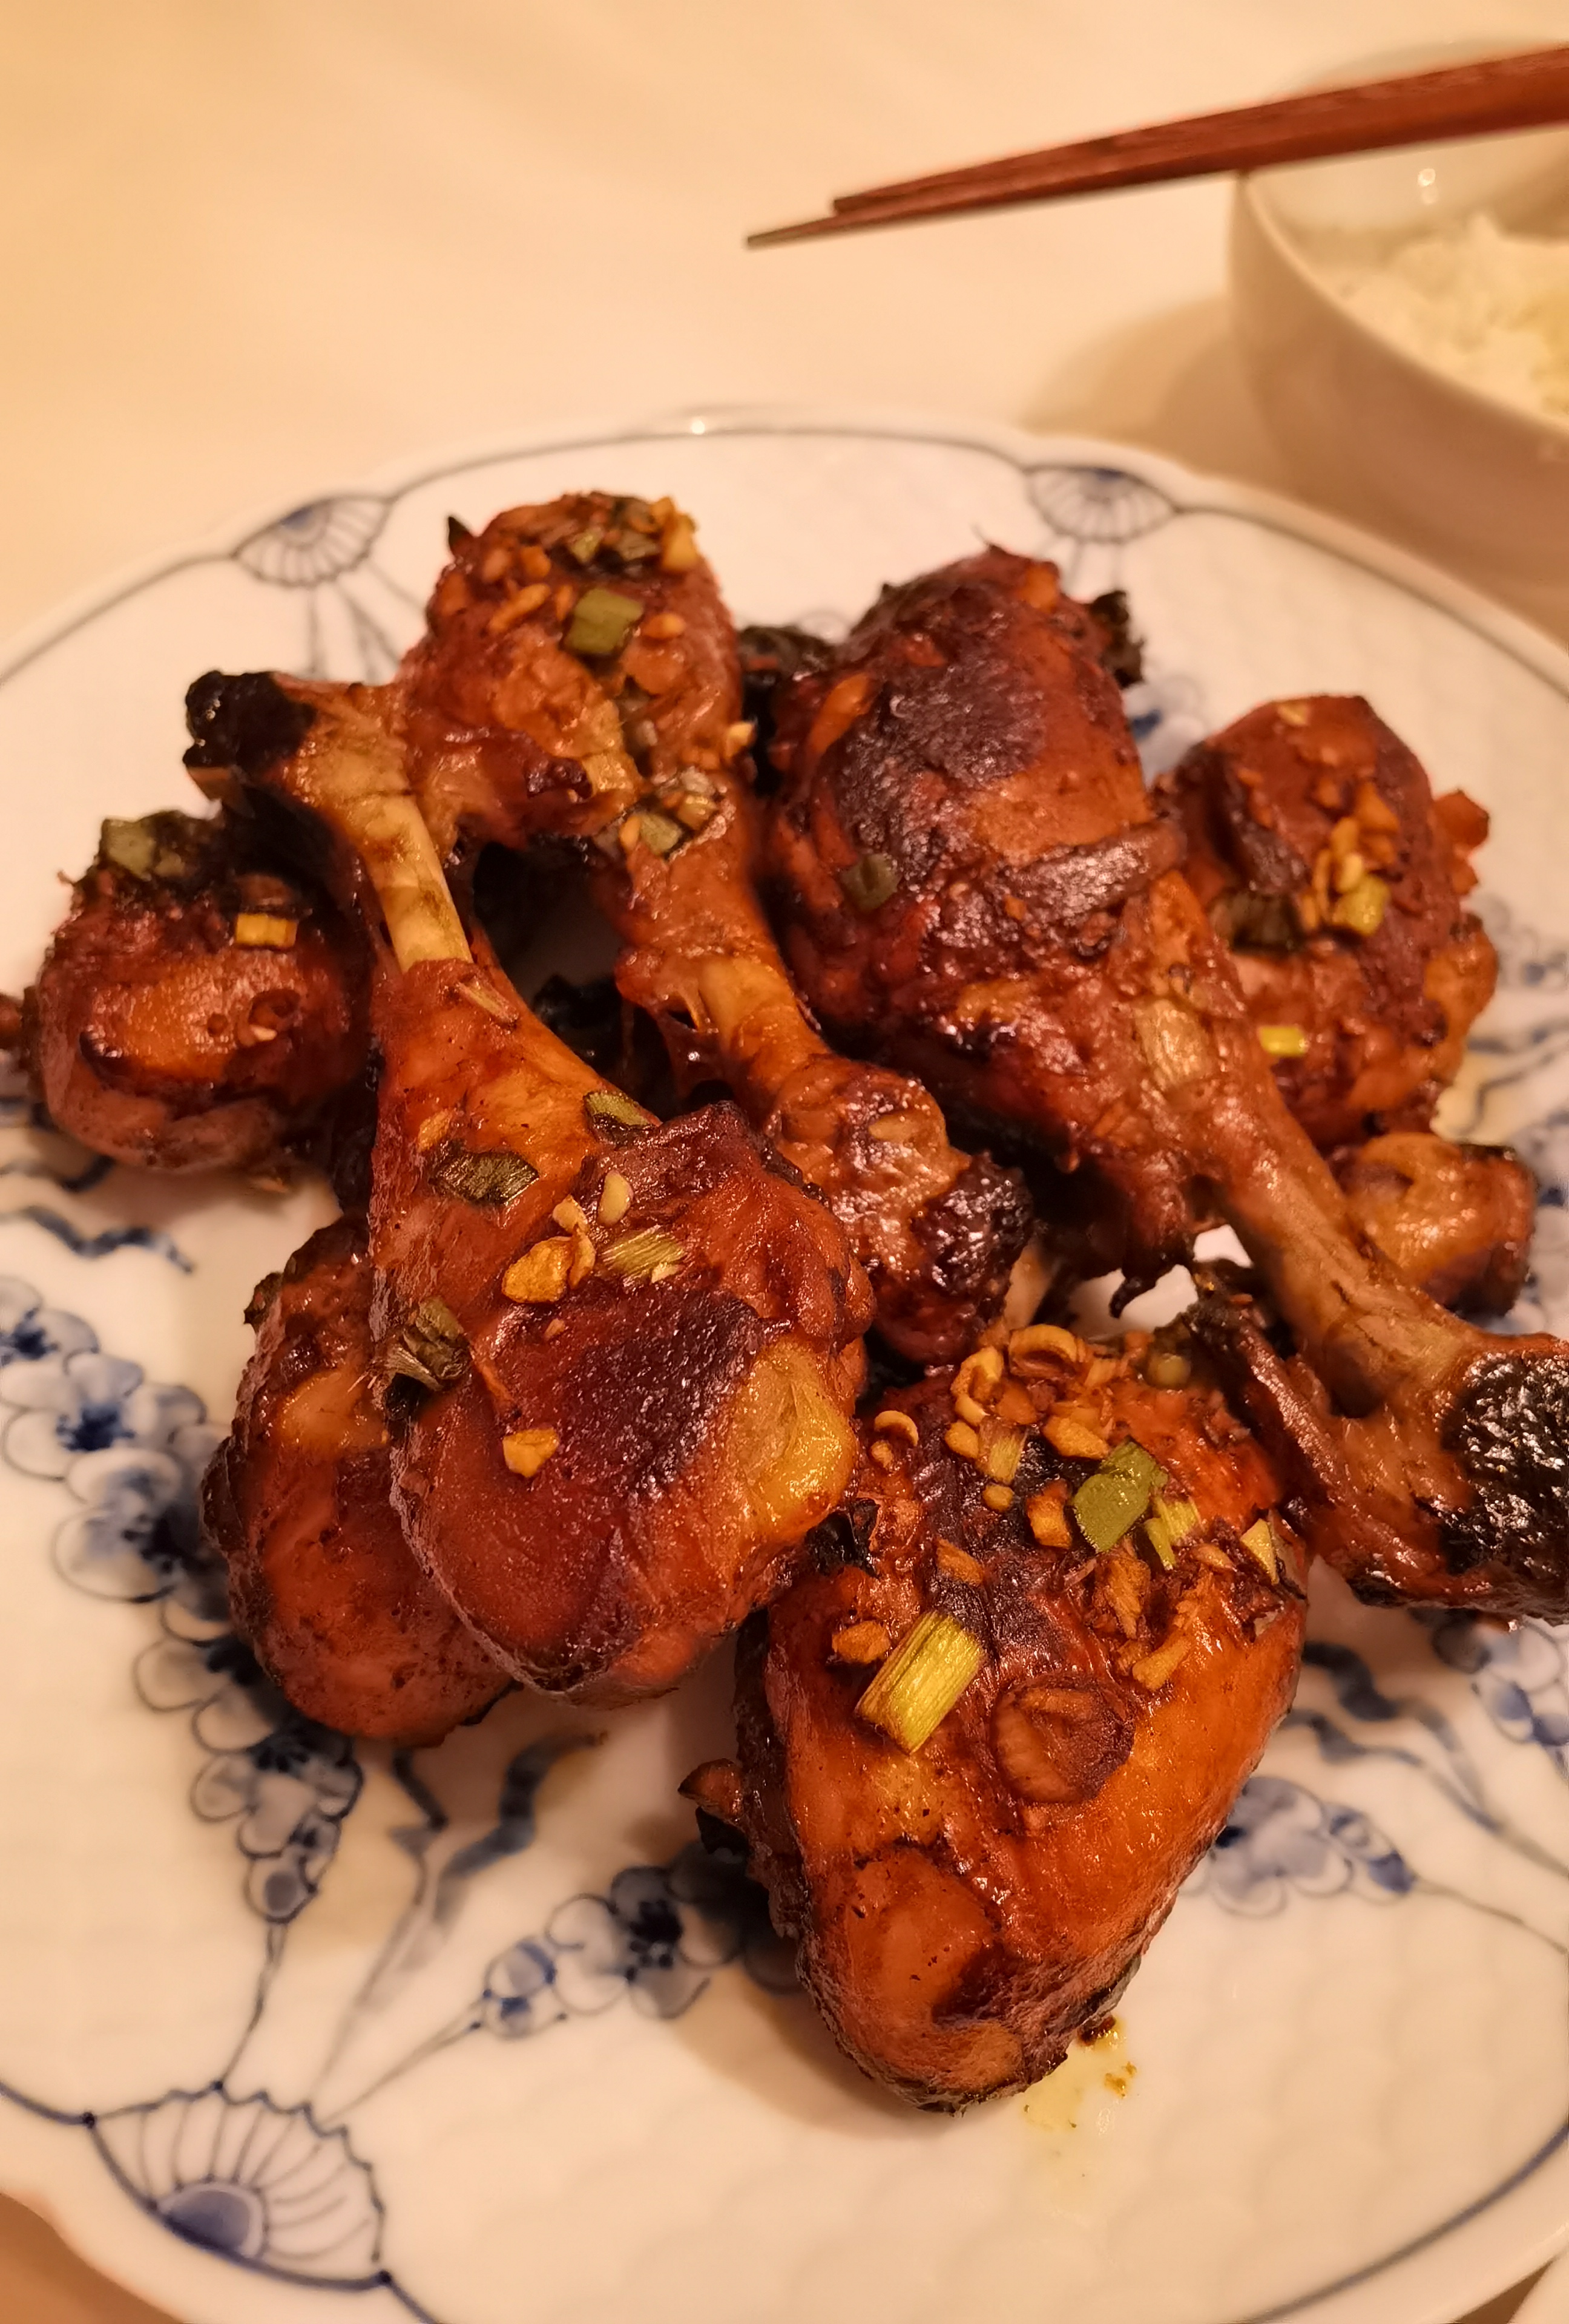 Honey soy baked chicken thighs, super tender and juicy